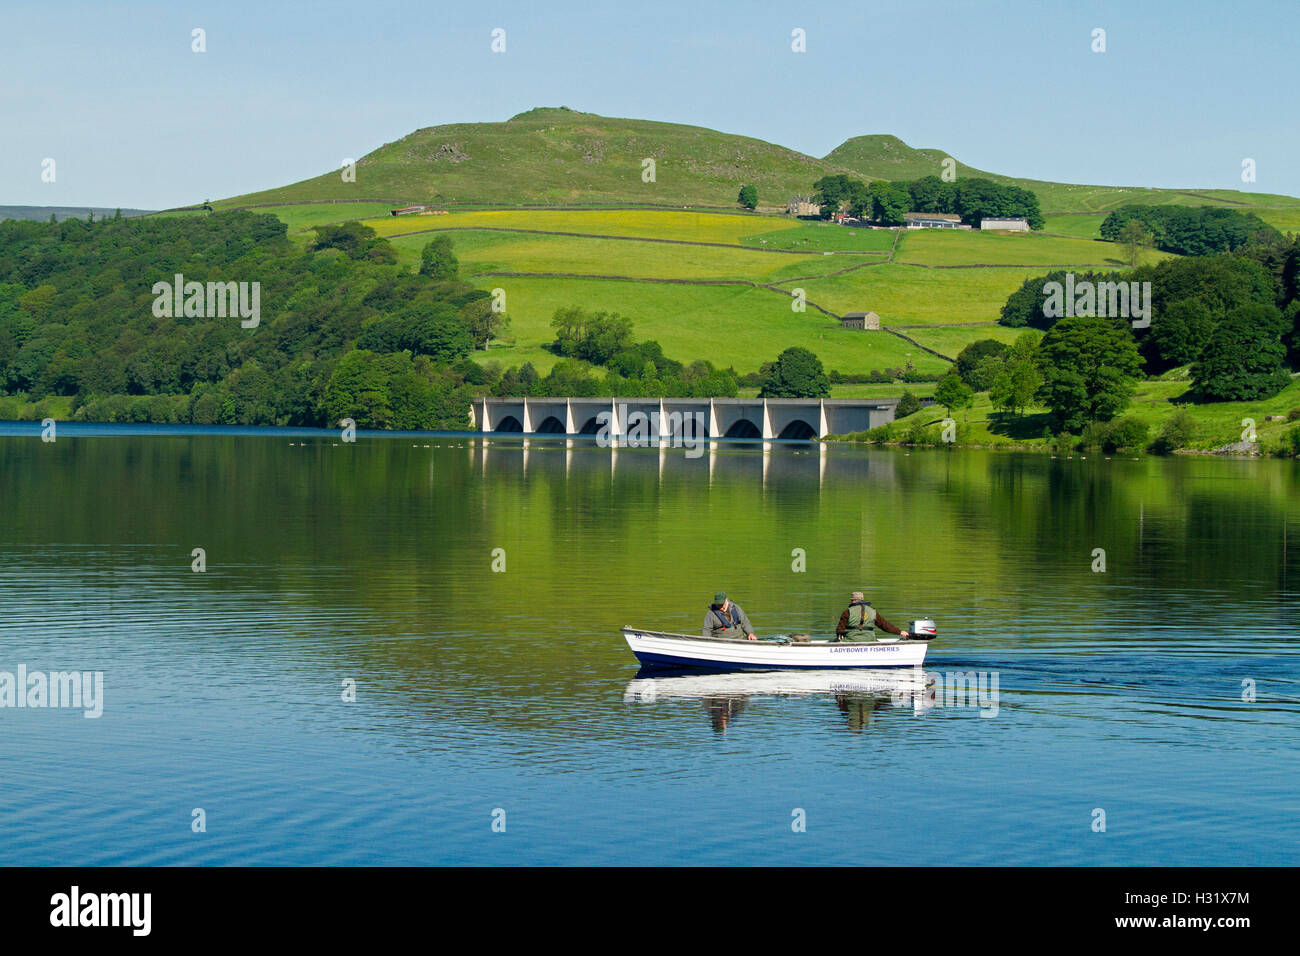 Fishermen in boat on calm blue waters of Ladybower Lake, Ashopton viaduct & farmlands in background under blue sky in England Stock Photo